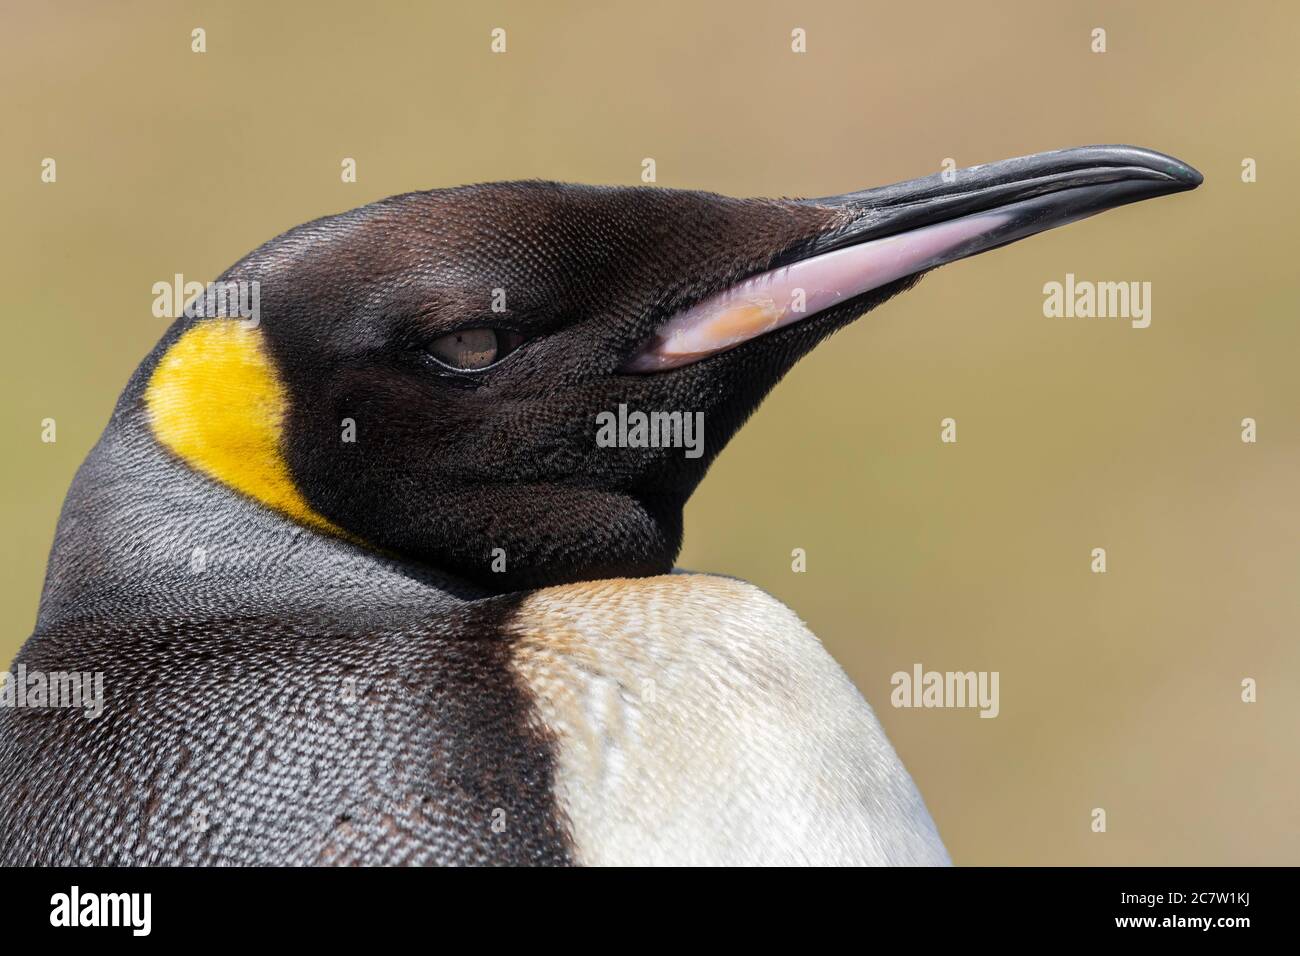 King Penguin (Aptenodytes patagonicus), close-up of an adult, Western Cape, South Africa Stock Photo